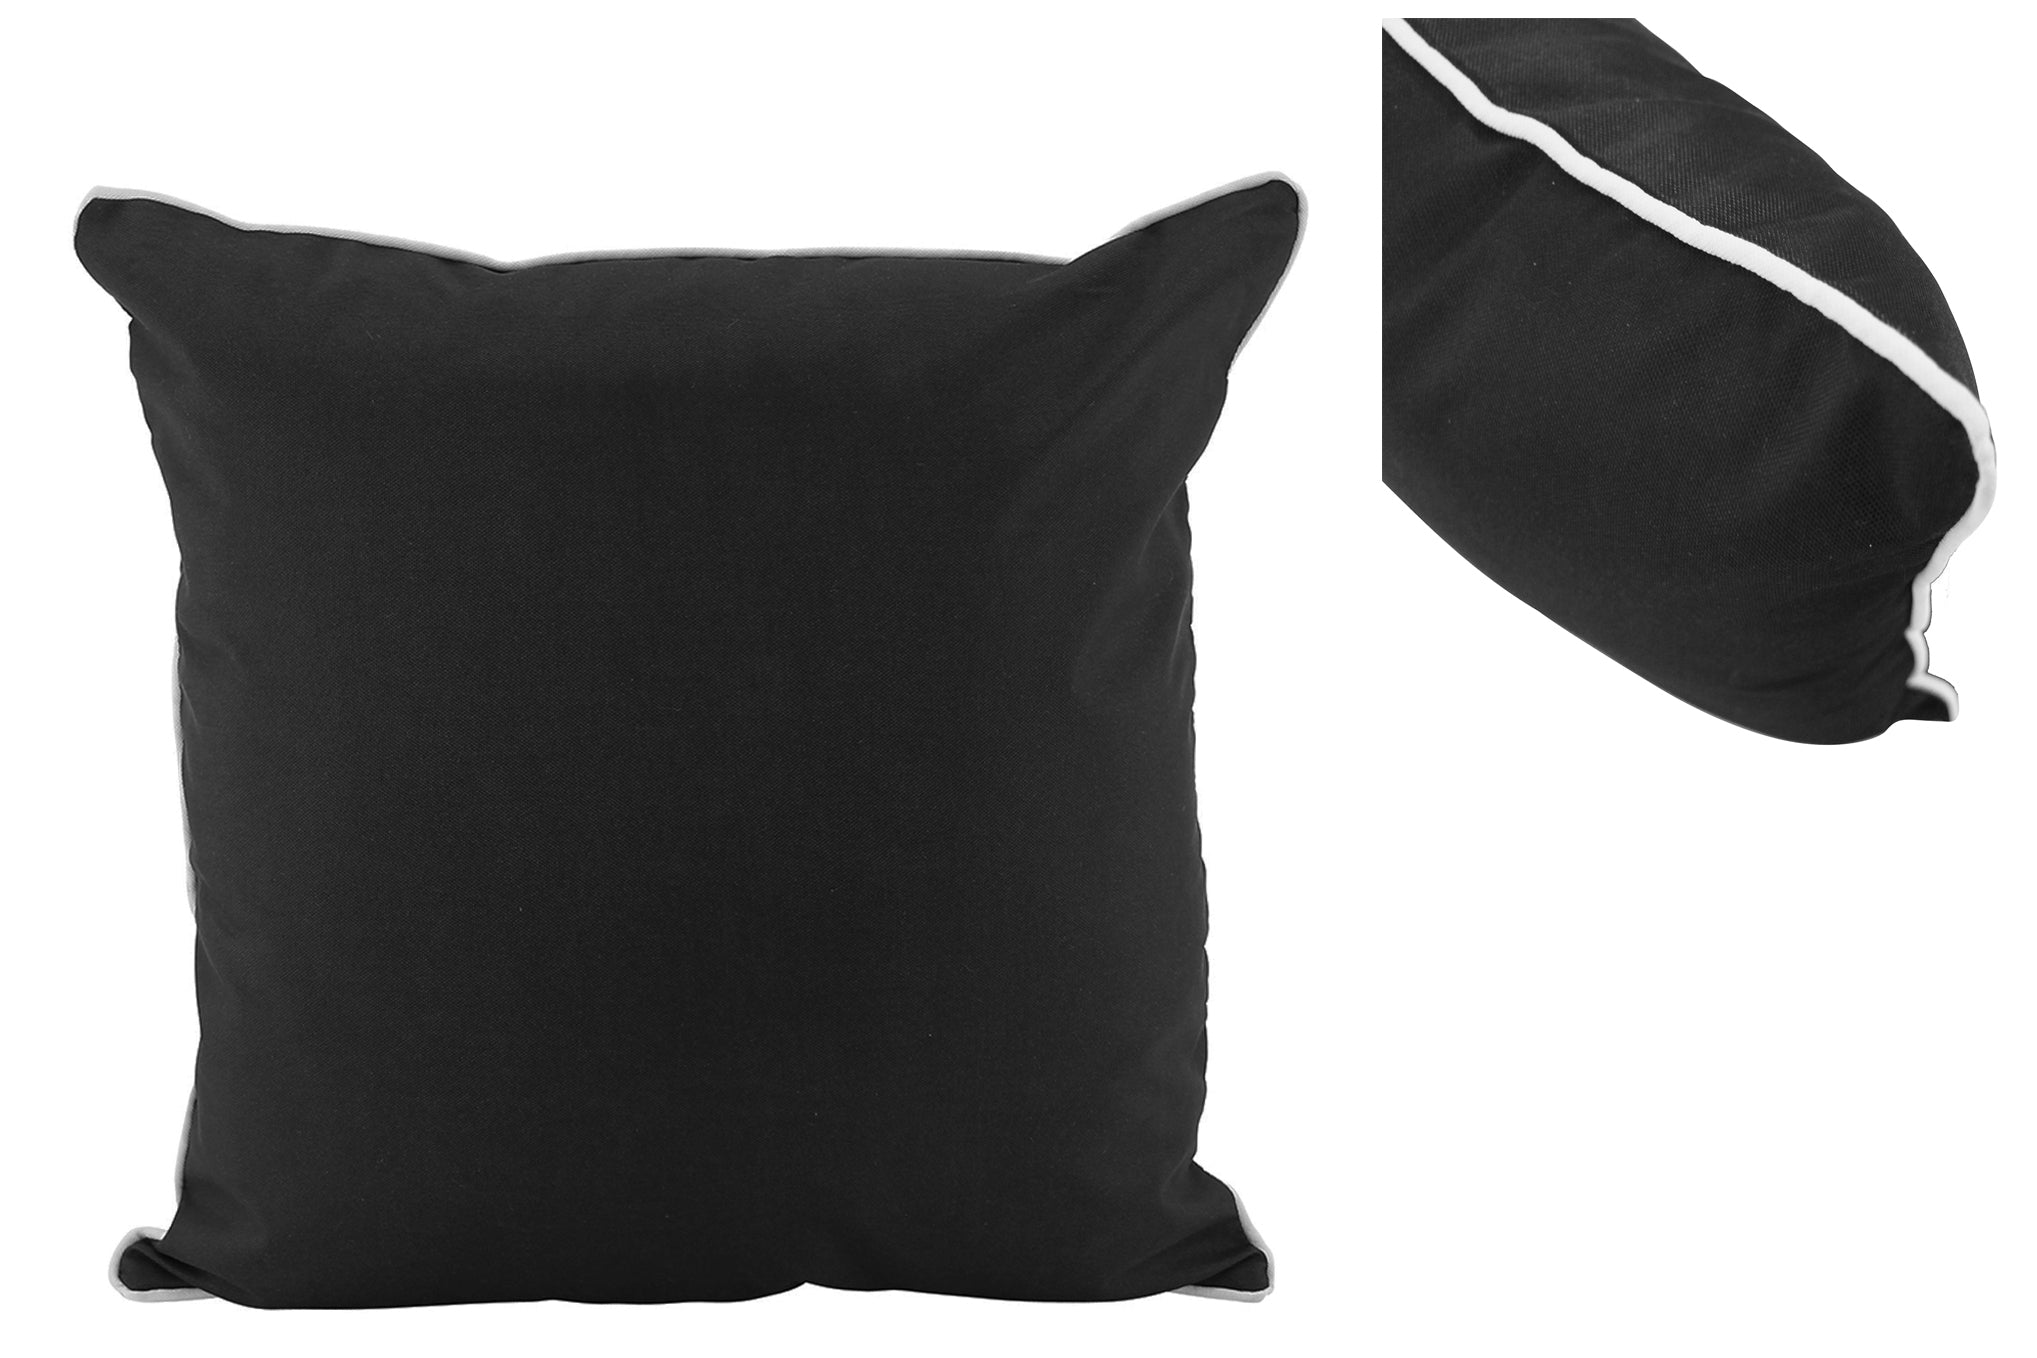 Basic Outdoor Scatter Cushion, Black with white trim 50cm x 50cm